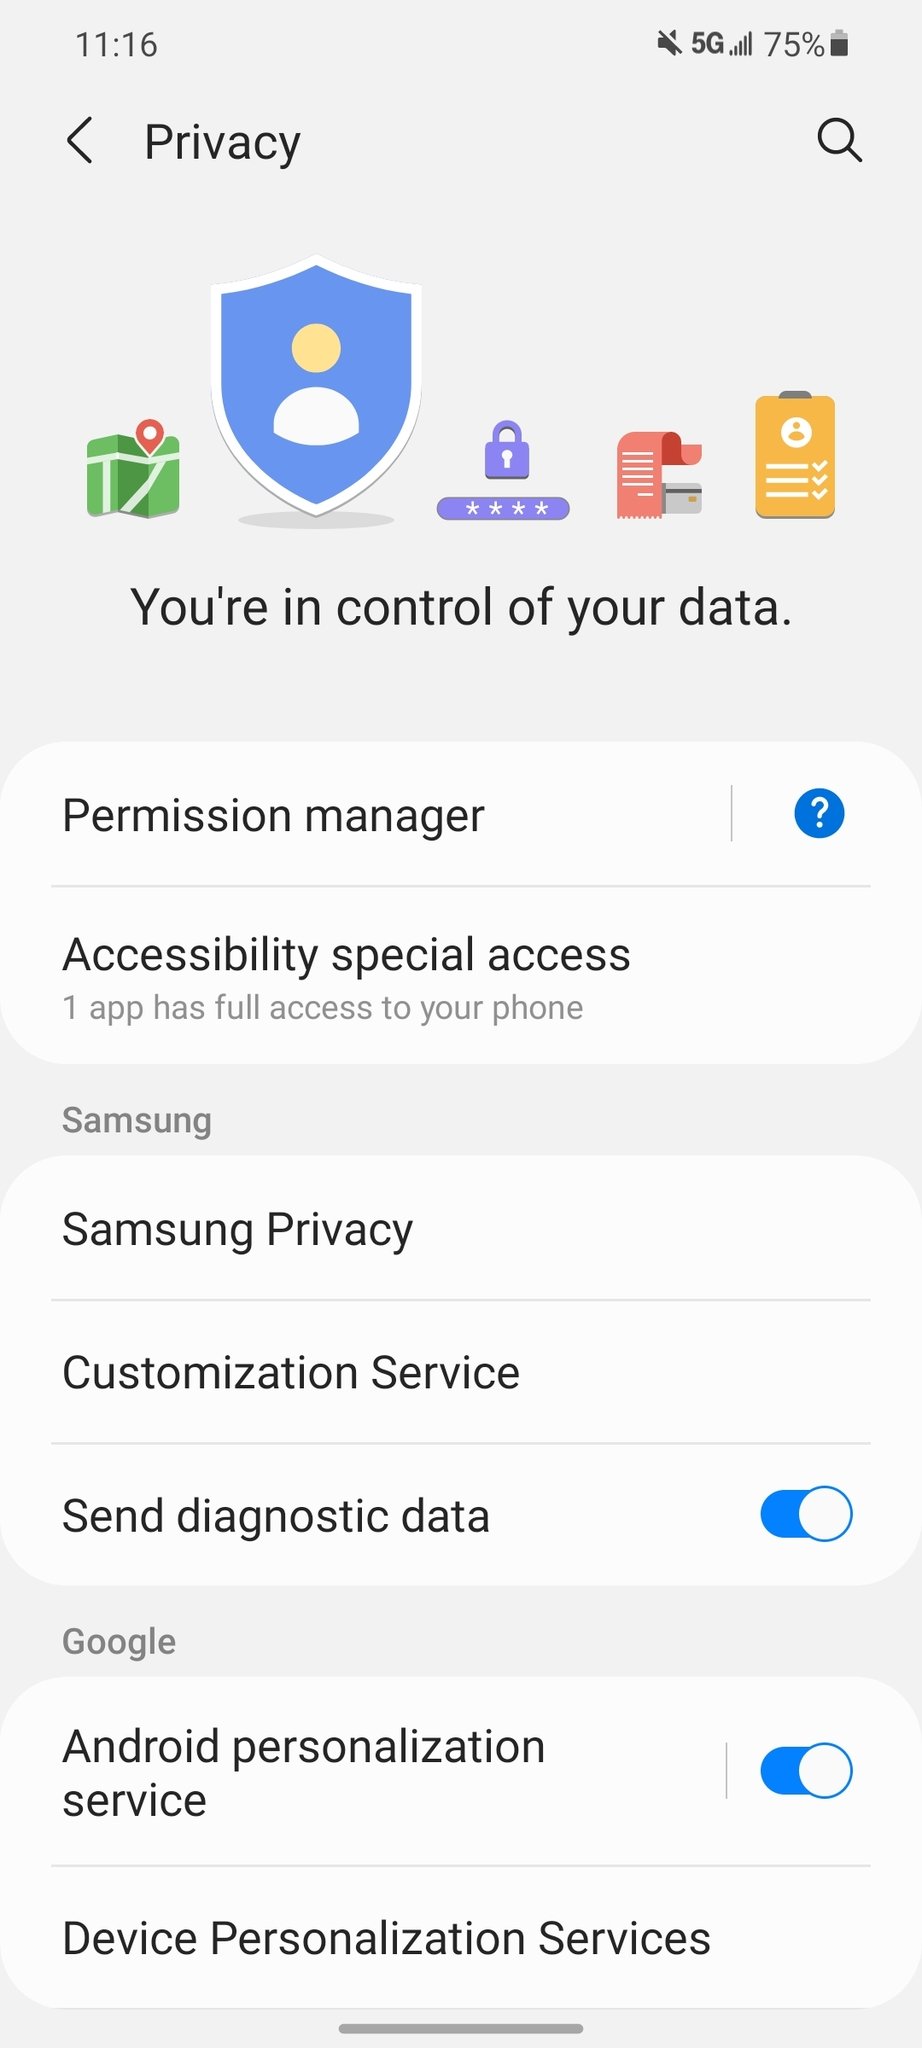 Turning off customized ads on a Samsung phone